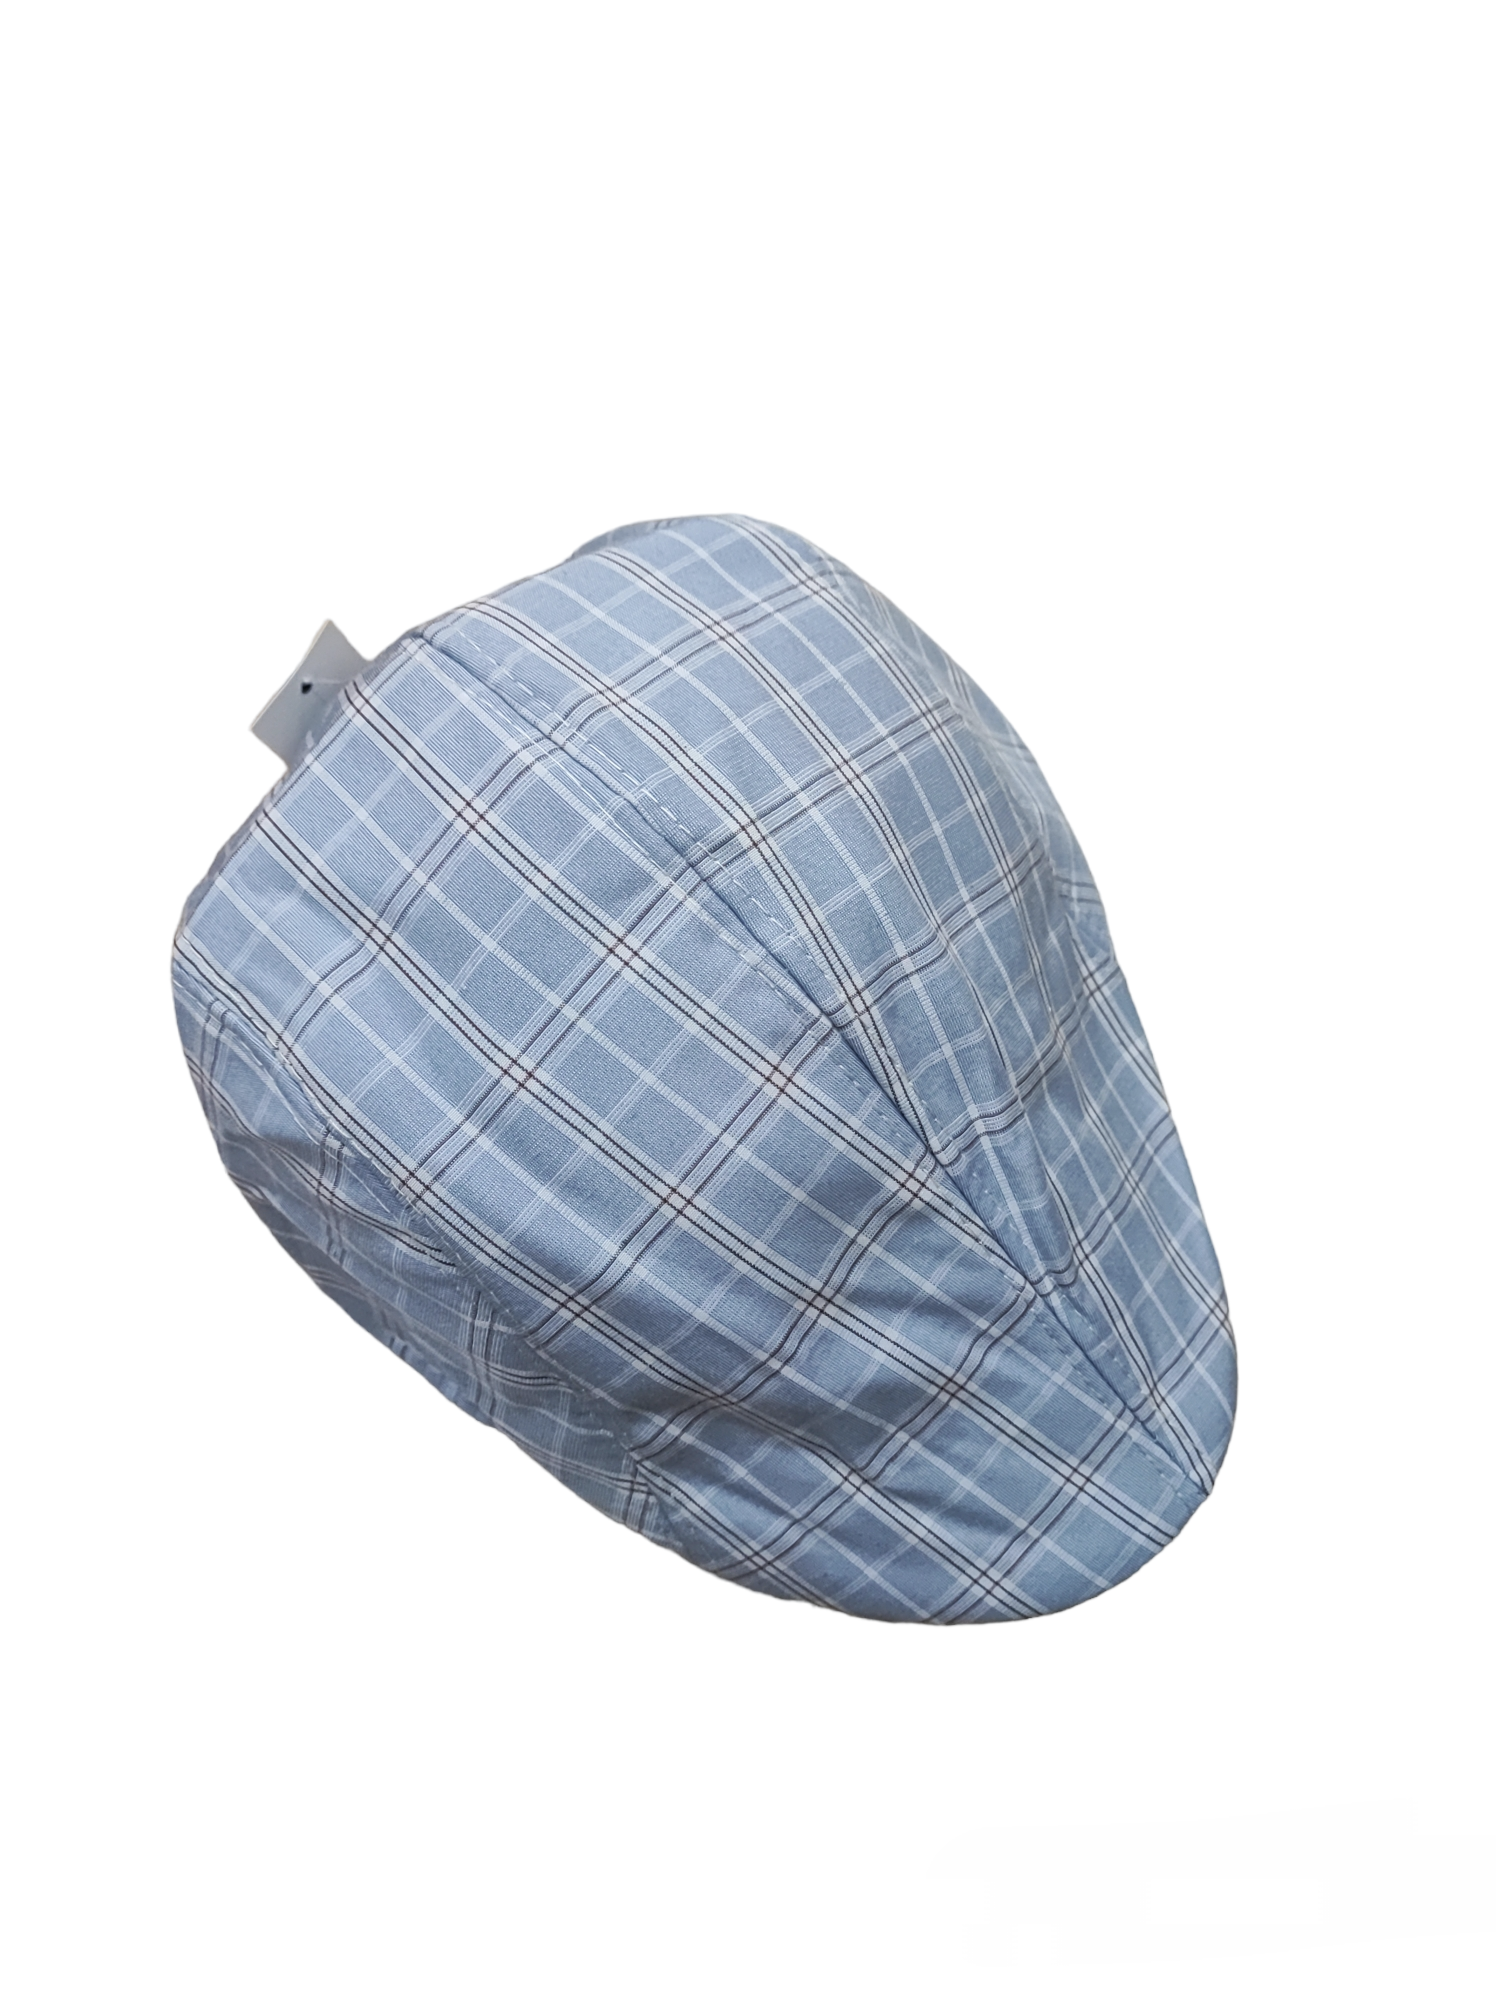 Berets with mini check pattern and small stripes (x12)